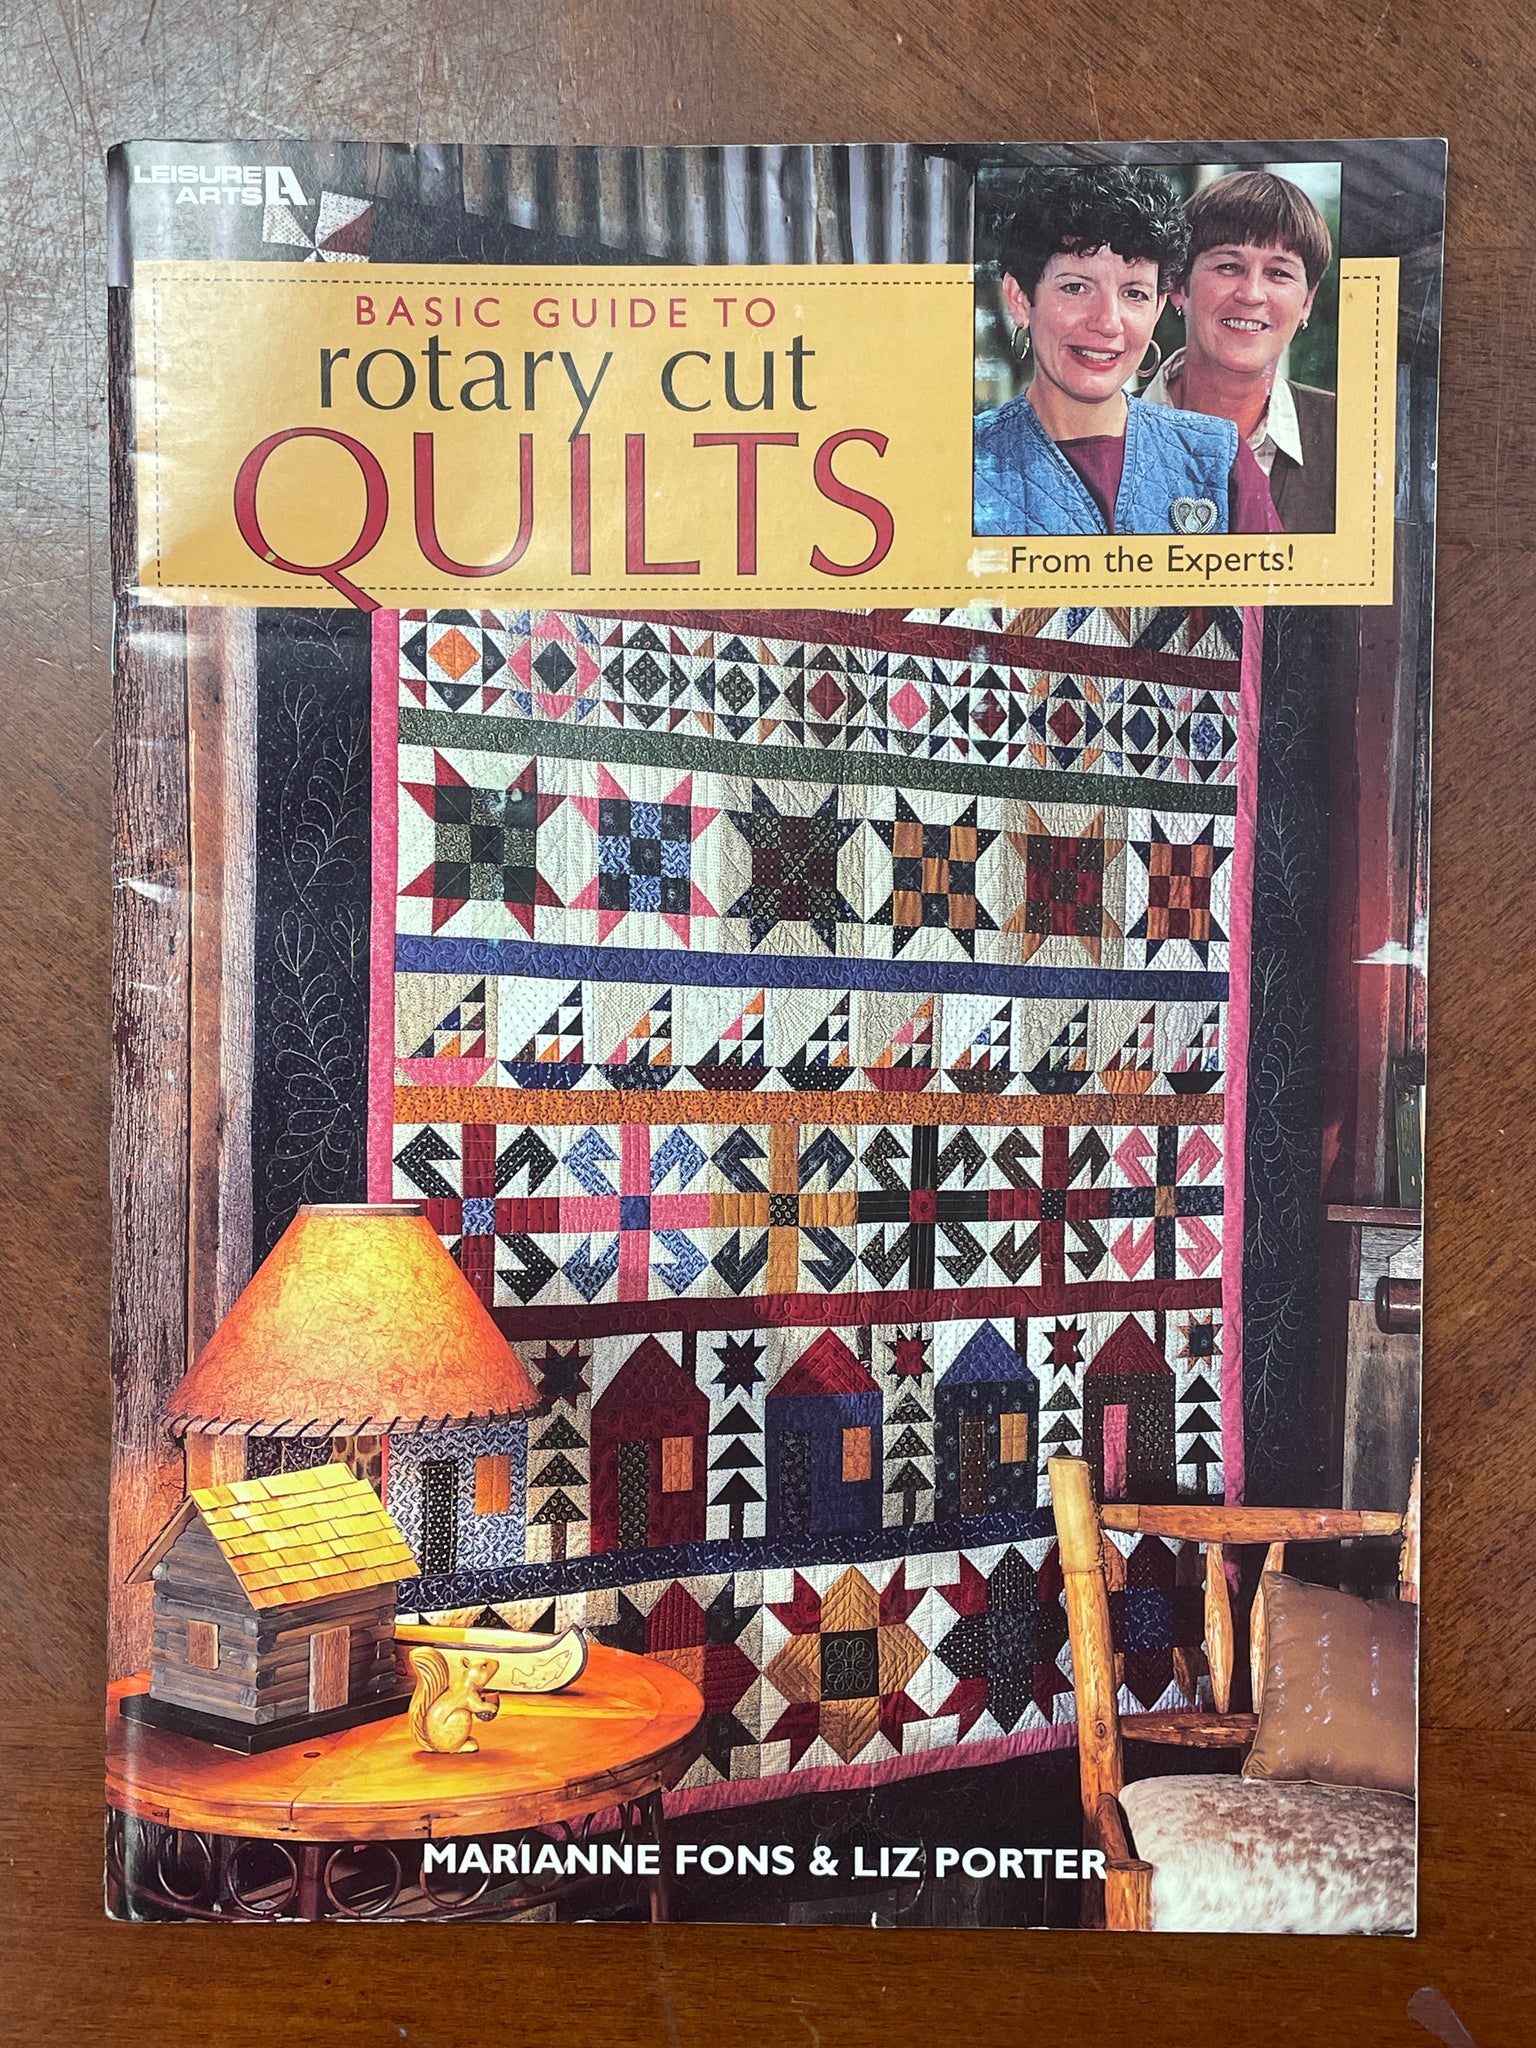 1999 Quilting Book - "Basic Guide to Rotary Cut Quilts"